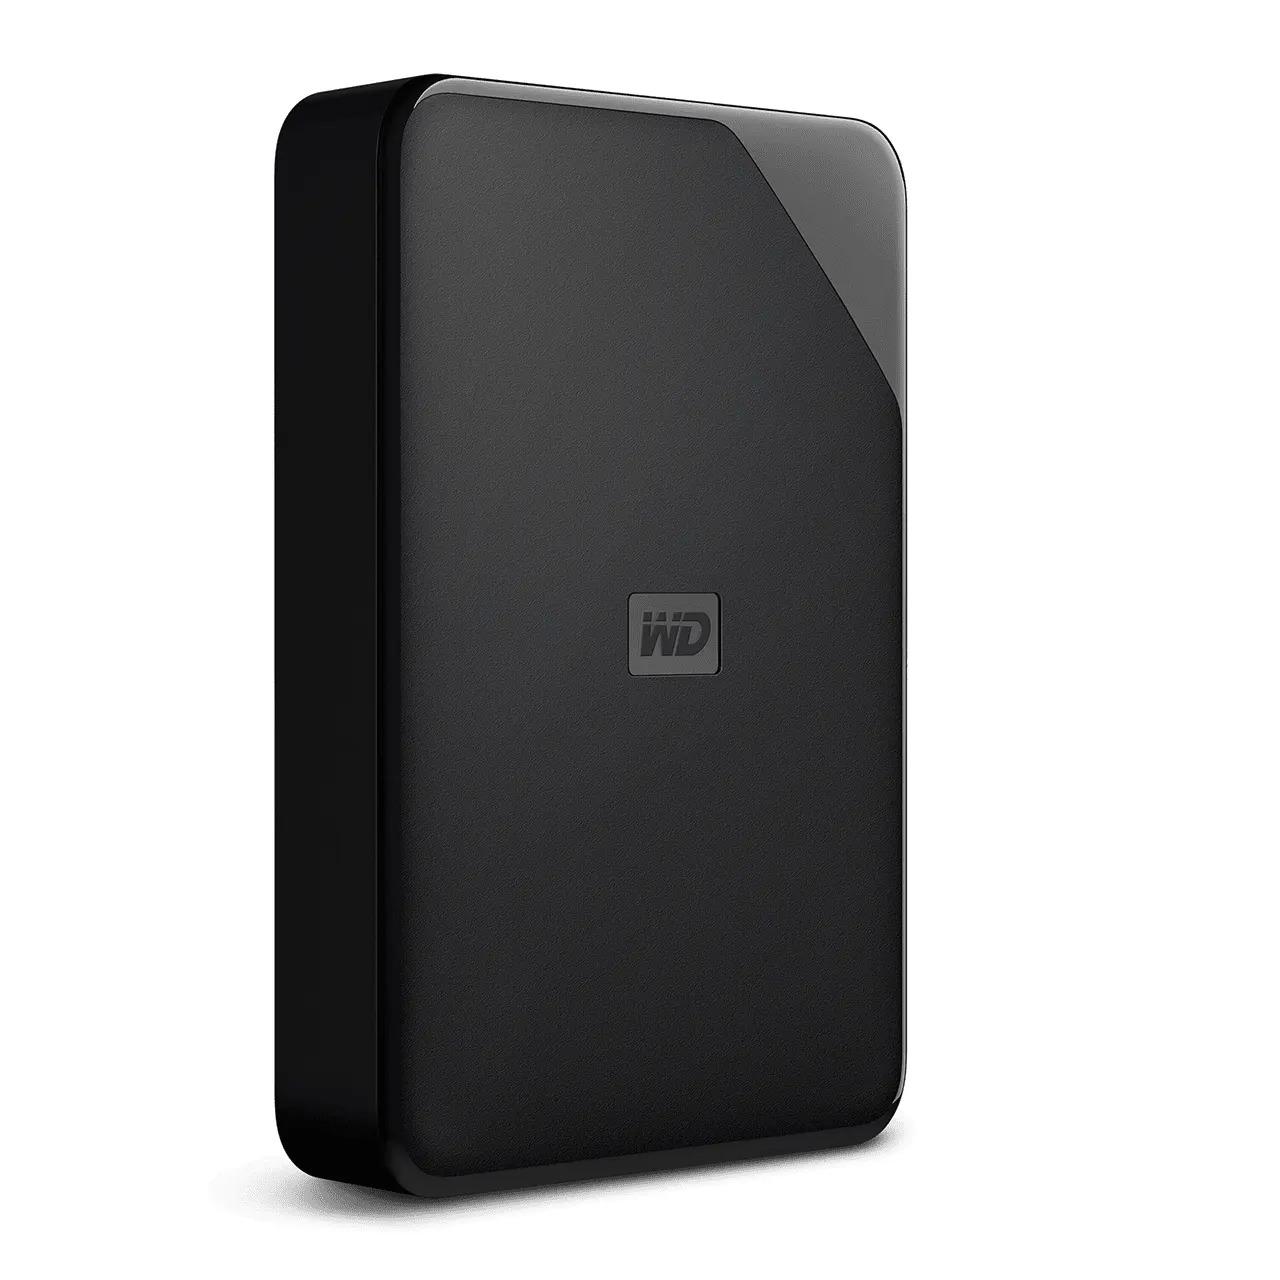 4TB WD Elements SE Refurb Portable Hard Drive for $45.99 Shipped